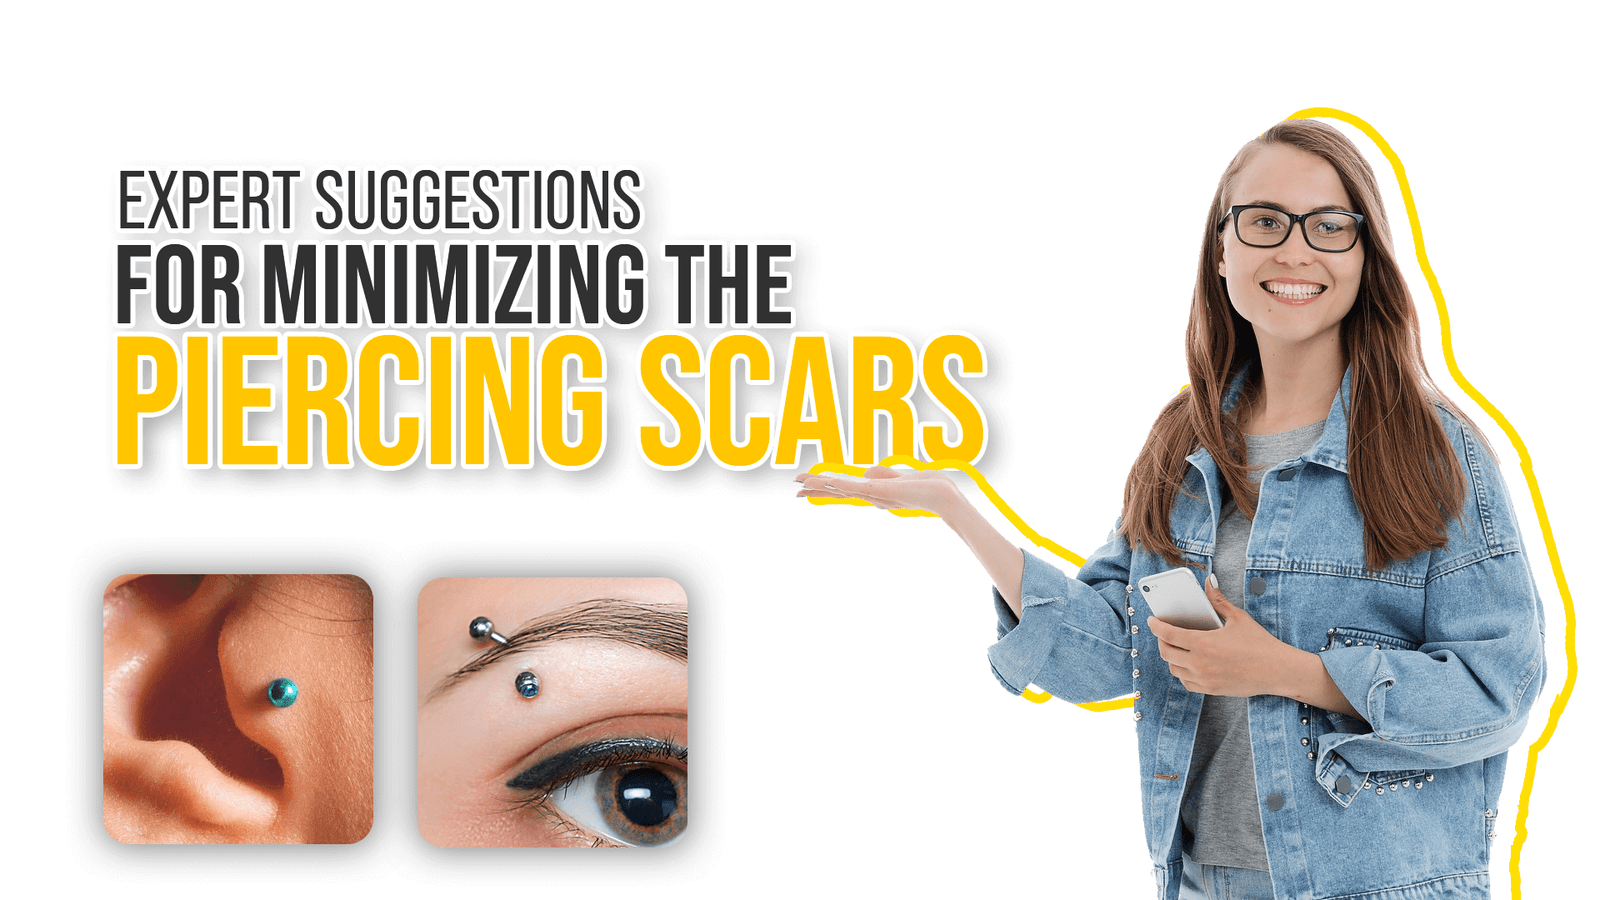 Expert Suggestions for Minimizing the Piercing Scars